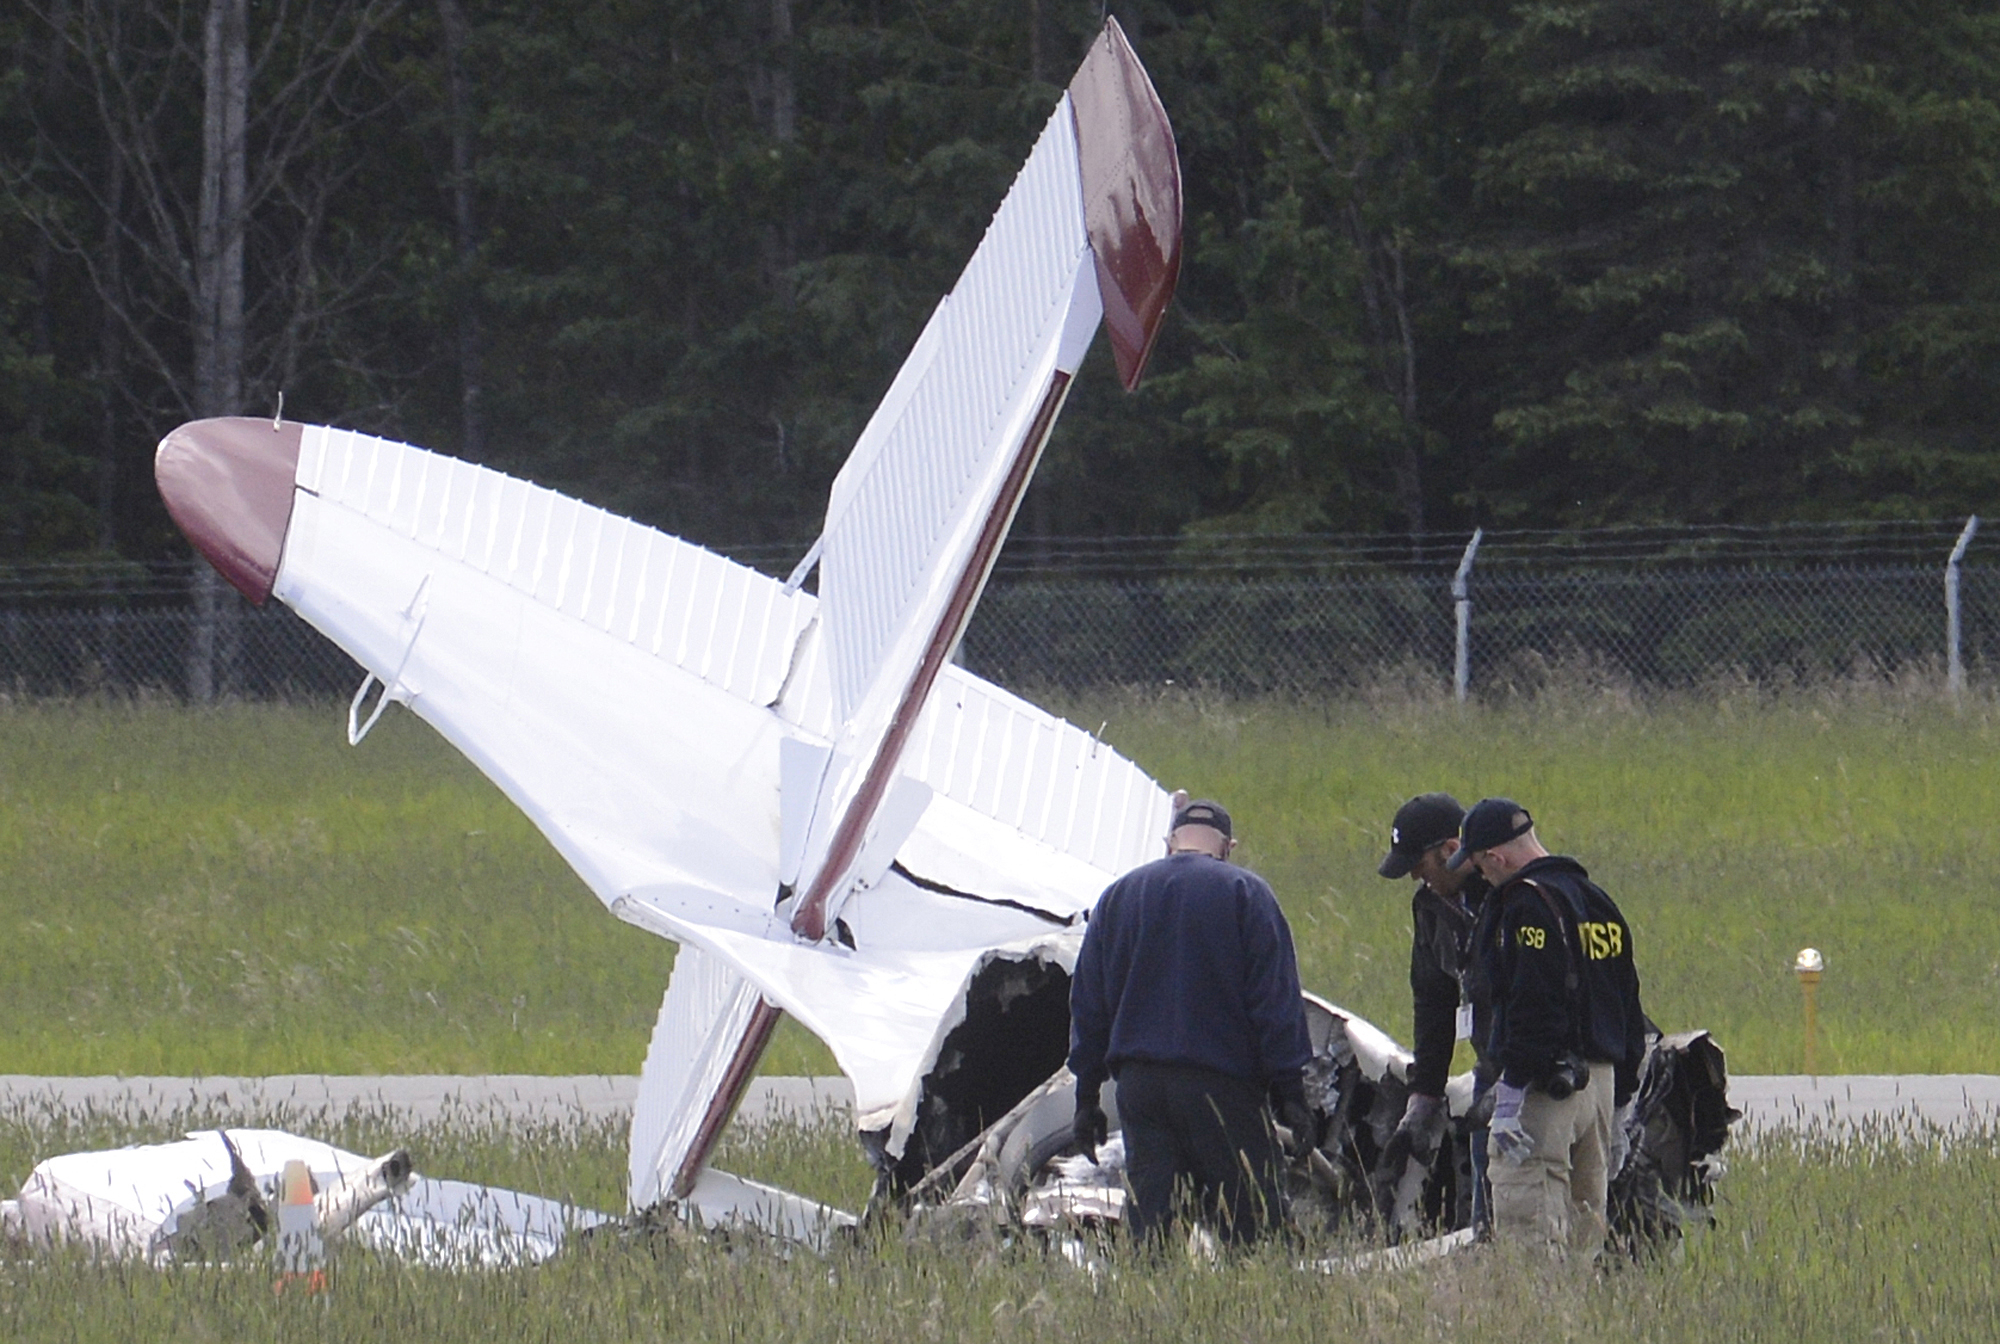 A go-team of National Transportation and Safety Board members examine the remains of an aircraft Monday July 8, 2013 after a wreck killed 10 people at the Soldotna, Alaska airport.-Photo by Rashah McChesney/Peninsula Clarion